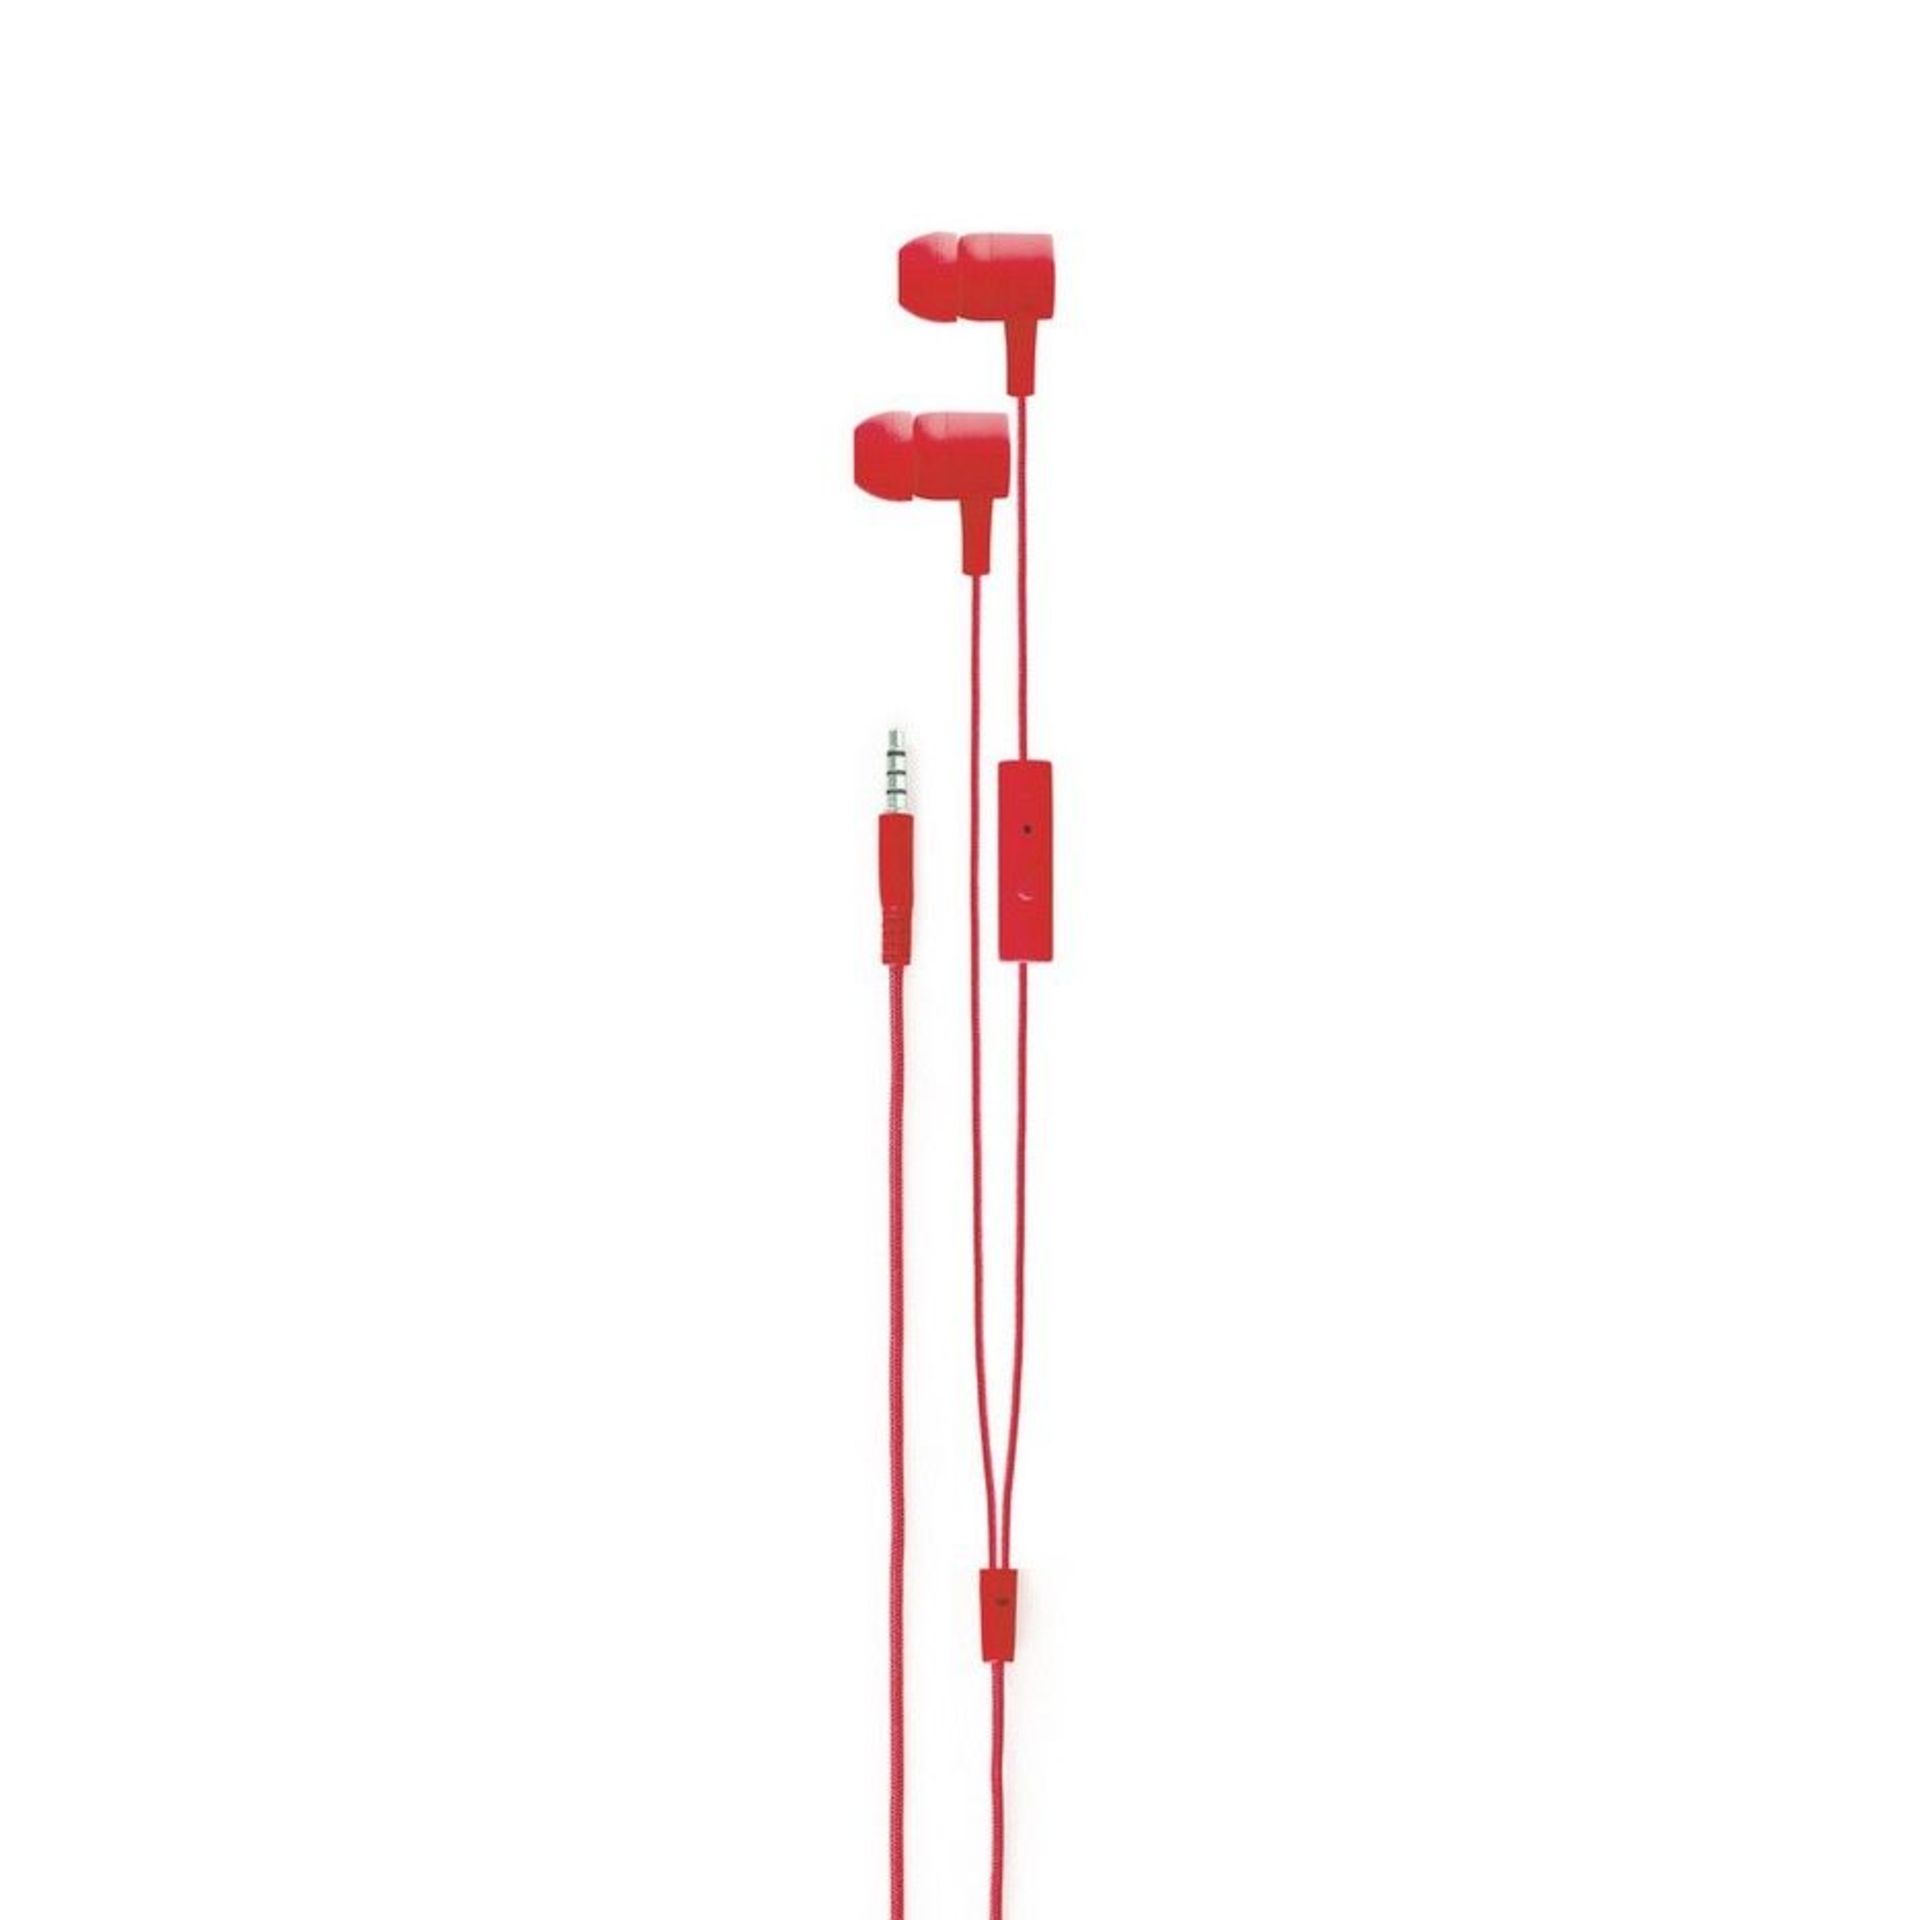 10 X Xqisit Ie H20 Headset - Stereo Earphones With In-Line Remote - Red